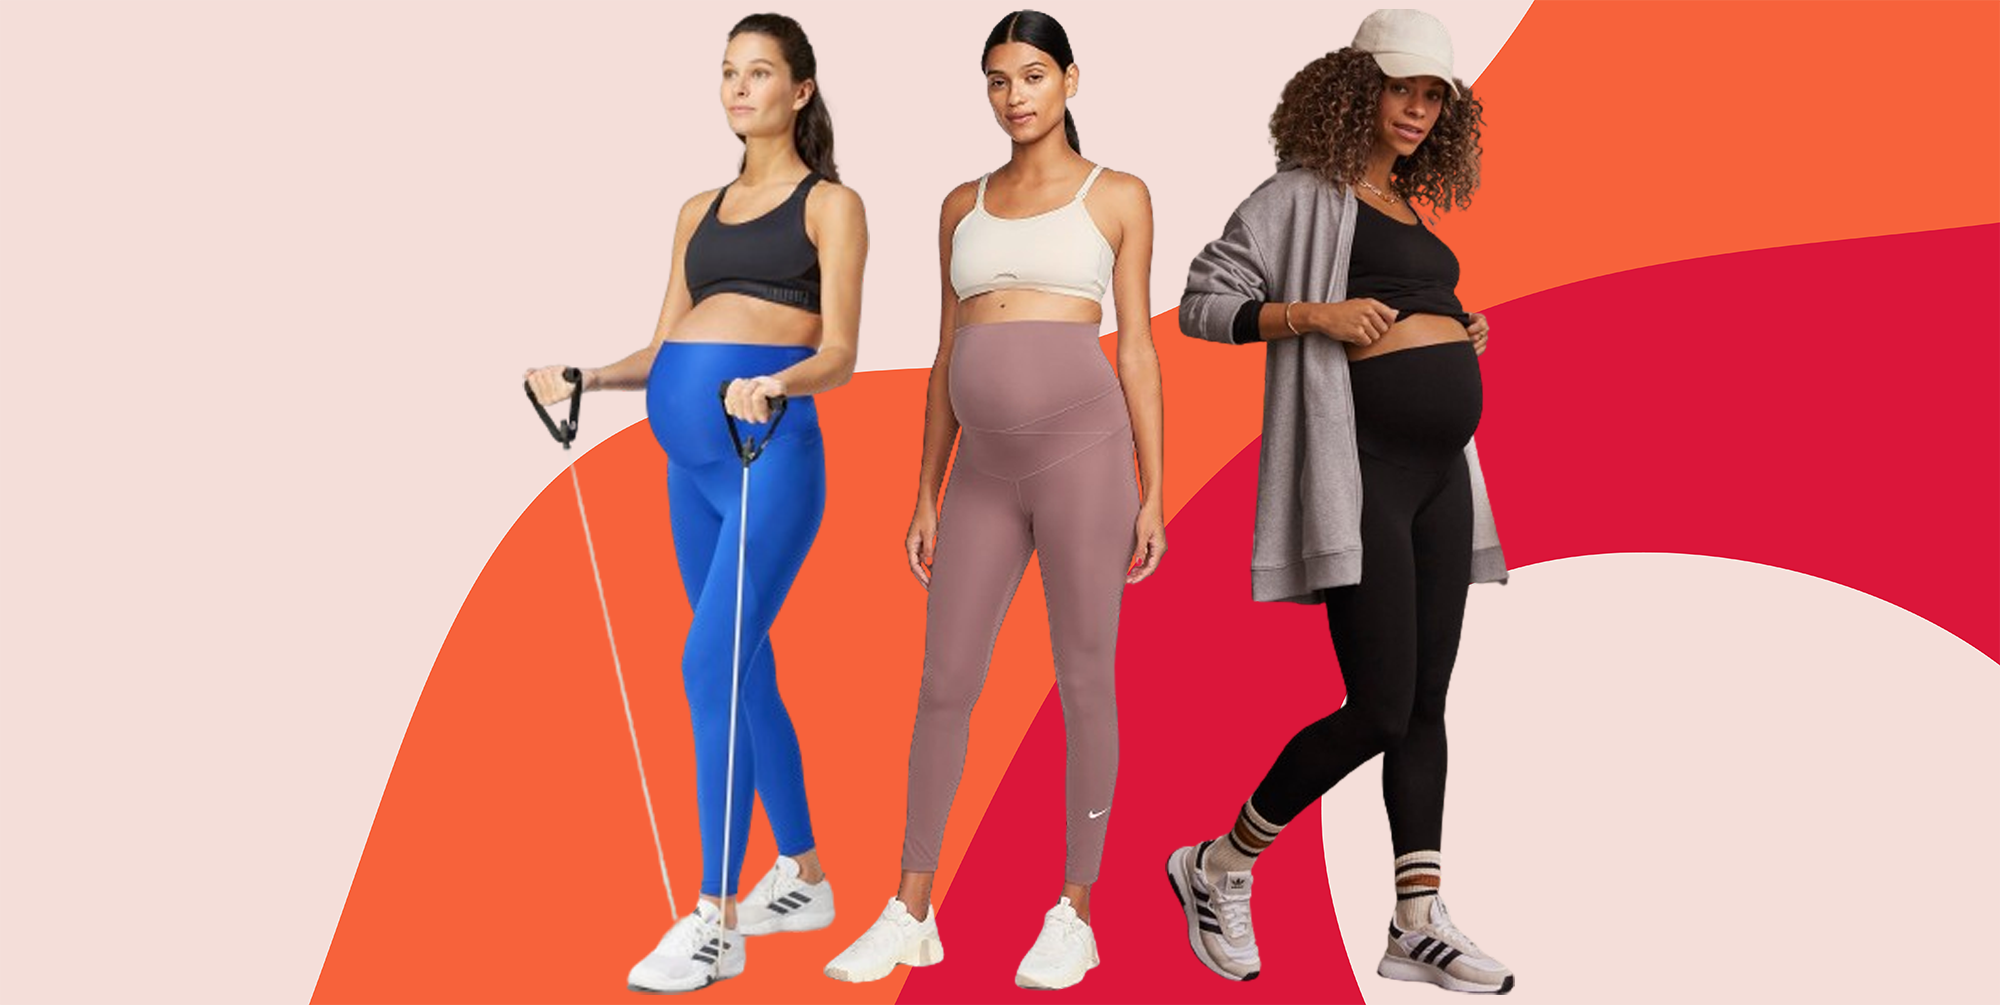 I Practically Lived in These Lululemon Leggings Throughout My Pregnancy